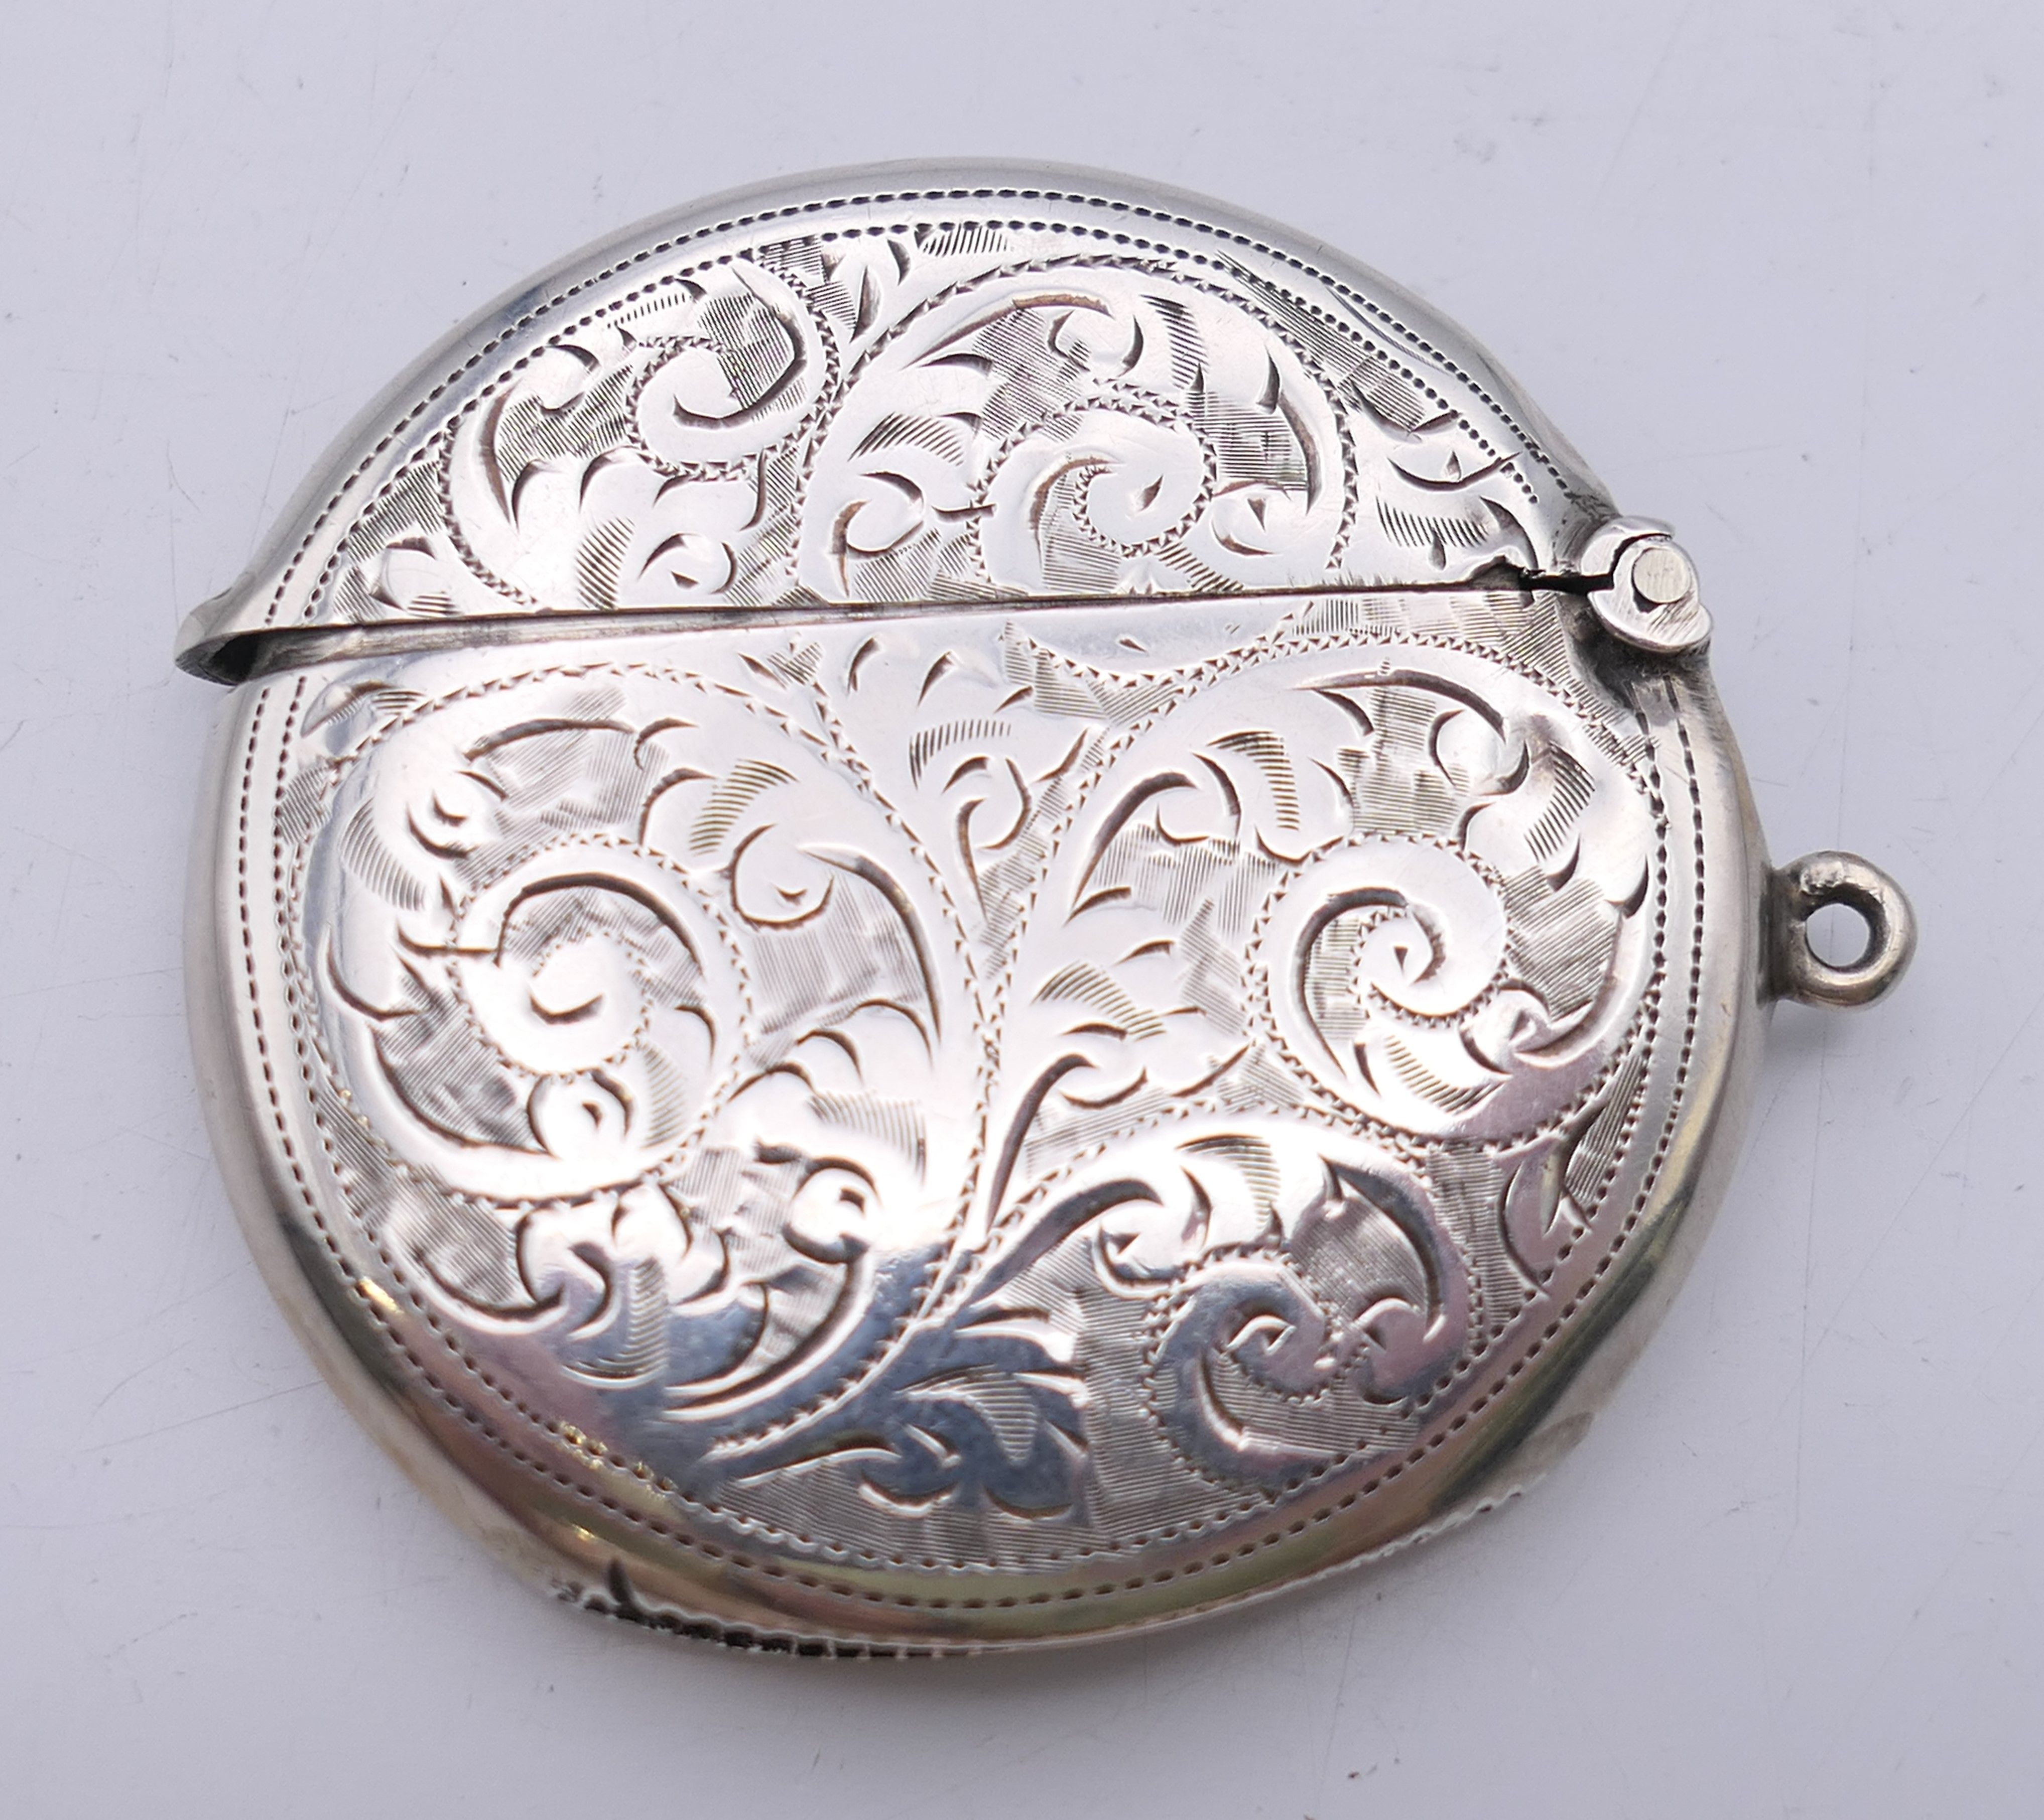 An Edwardian silver round vesta with leaf chased pattern, Birmingham 1909. 4.5 cm diameter. 15. - Image 2 of 4